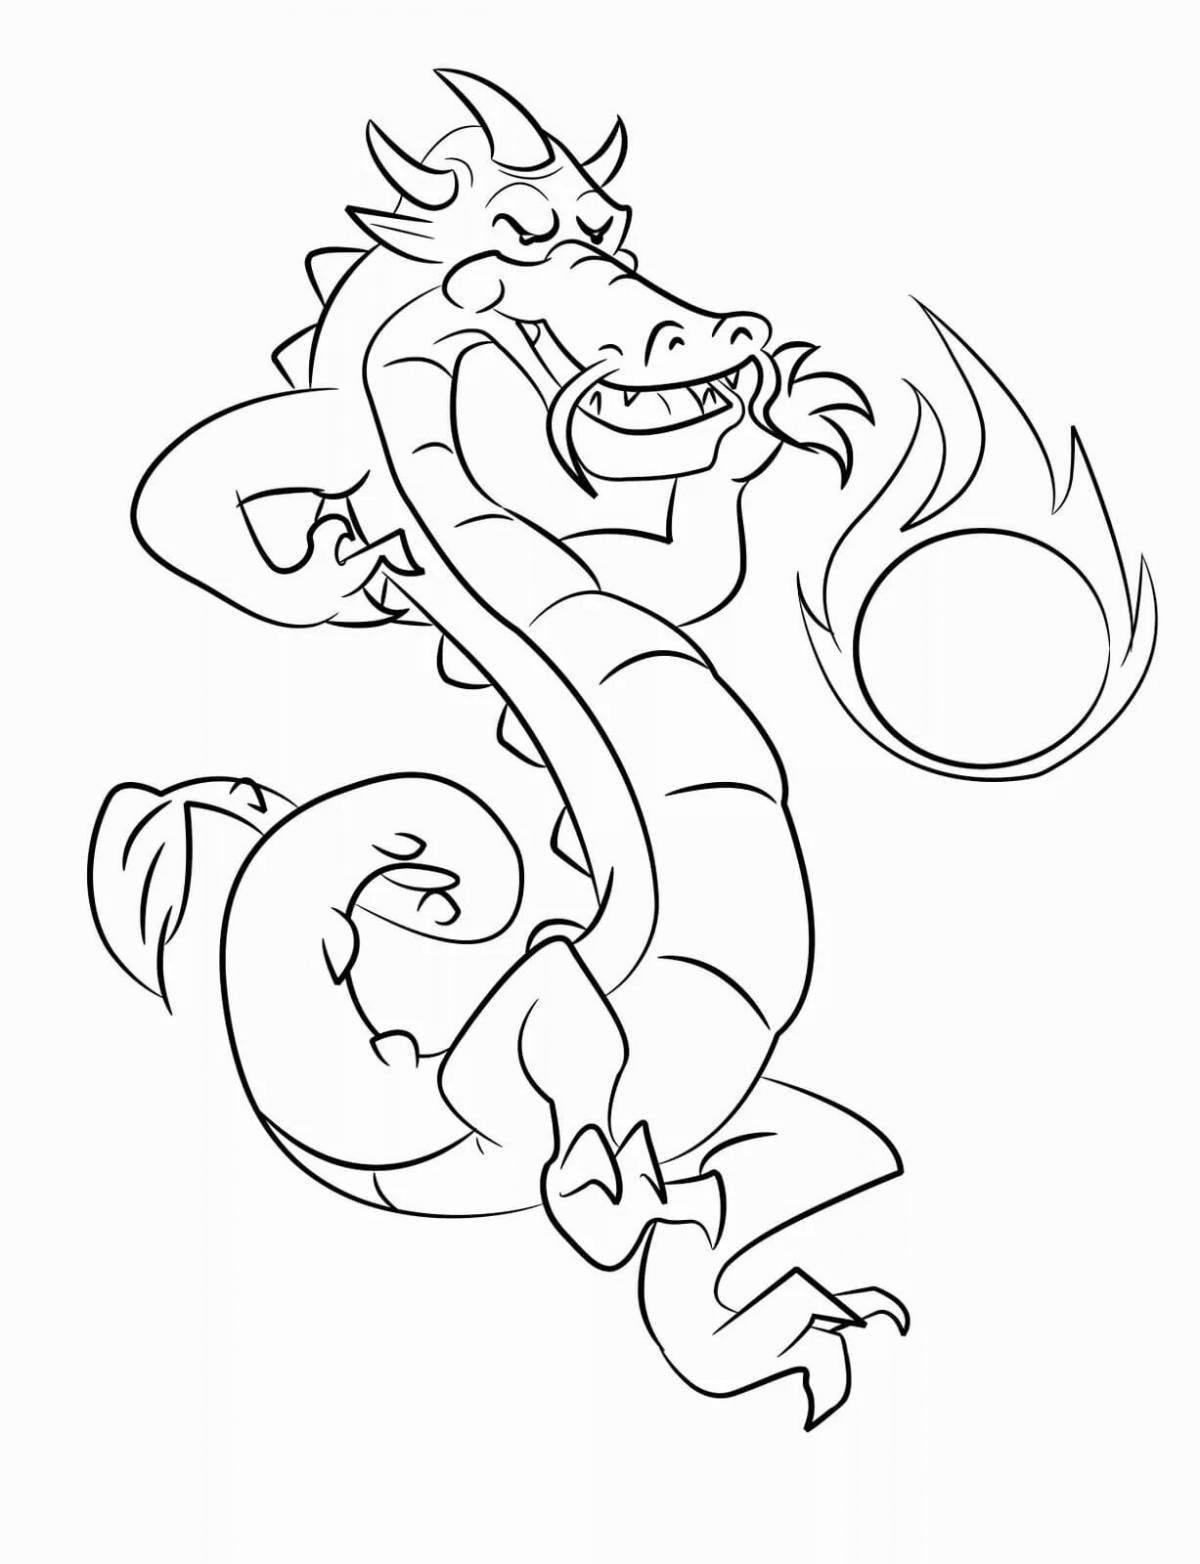 Colorfully detailed Chinese dragon coloring page